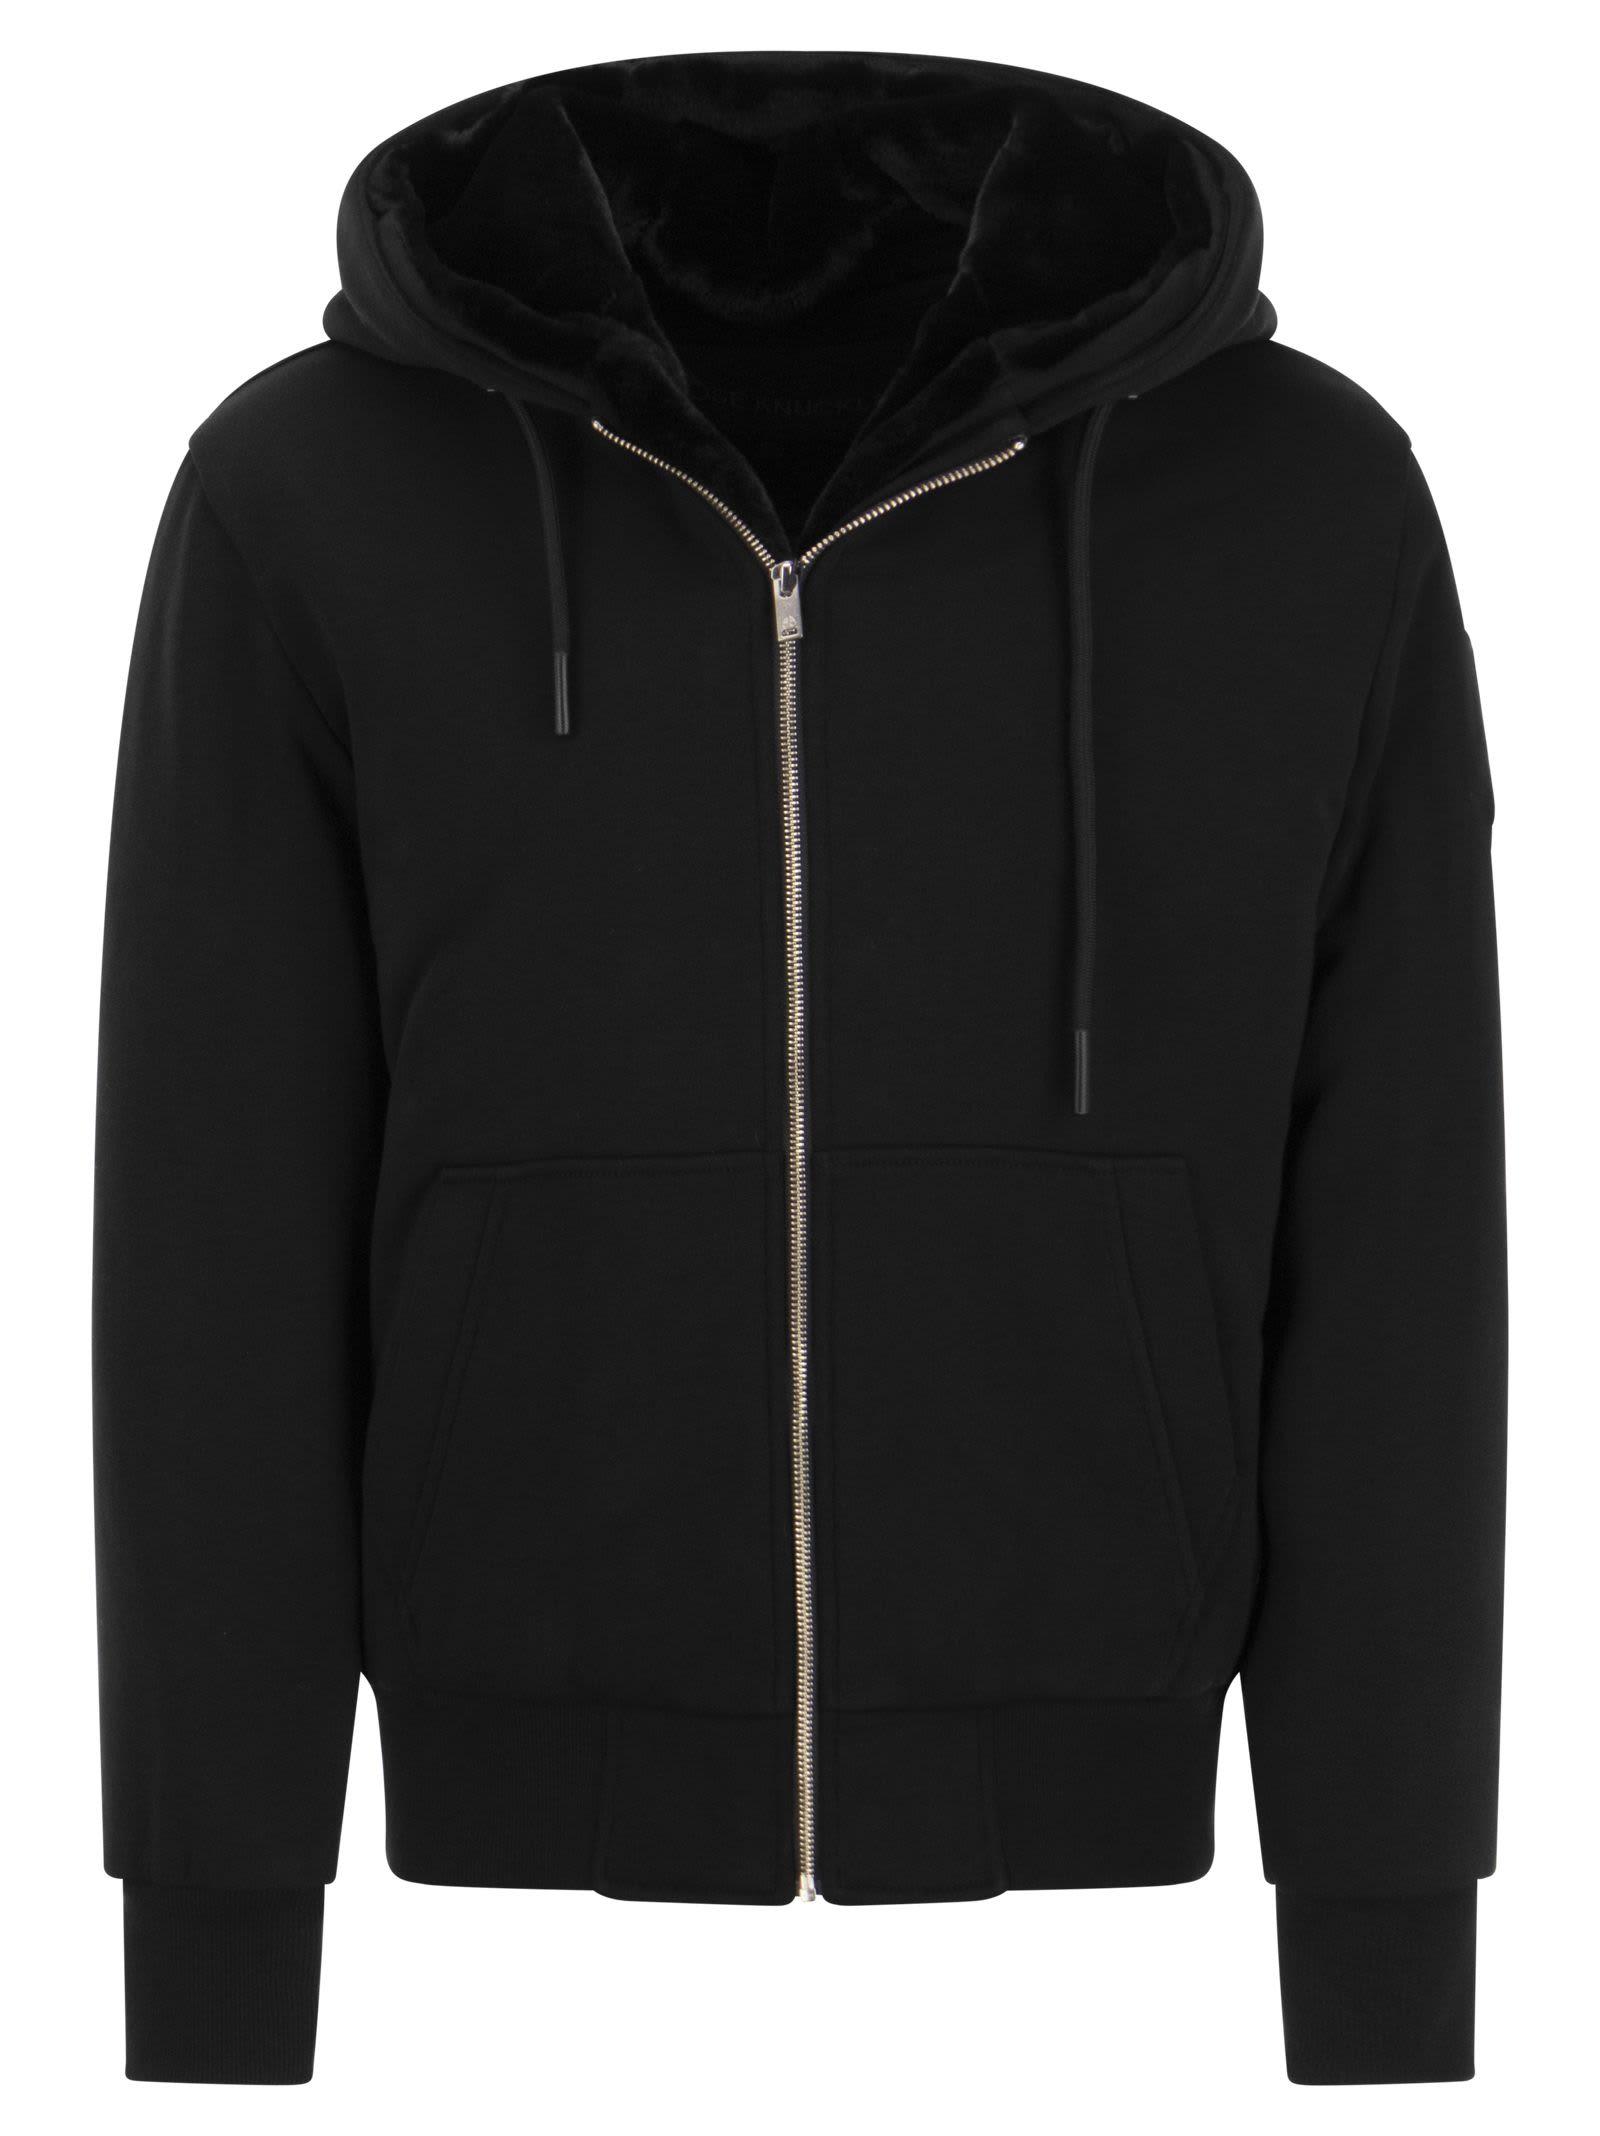 Moose Knuckles Classic Bunny - Faux Fur Lined Hoodie in Black for